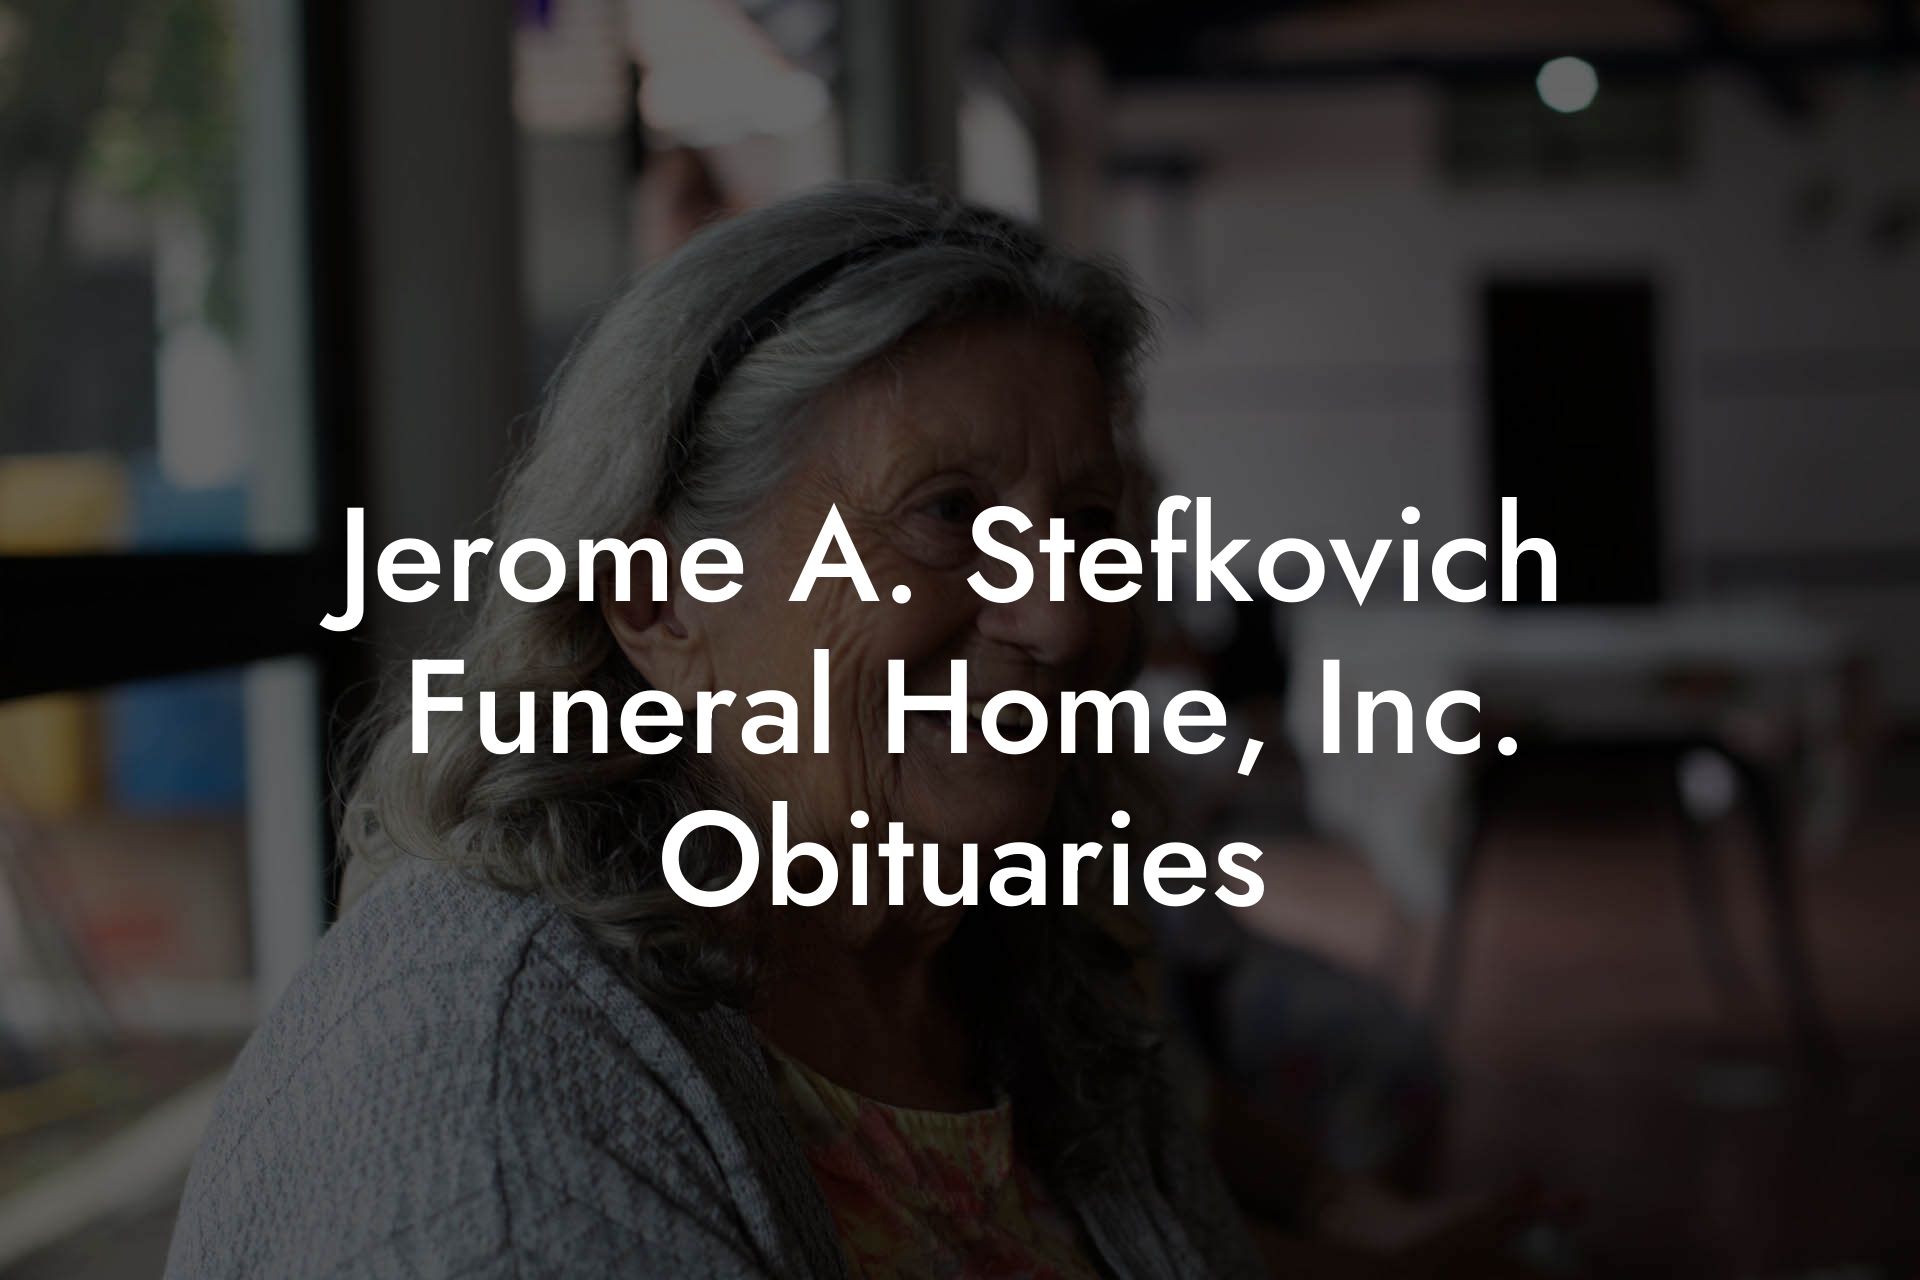 Jerome A. Stefkovich Funeral Home, Inc. Obituaries